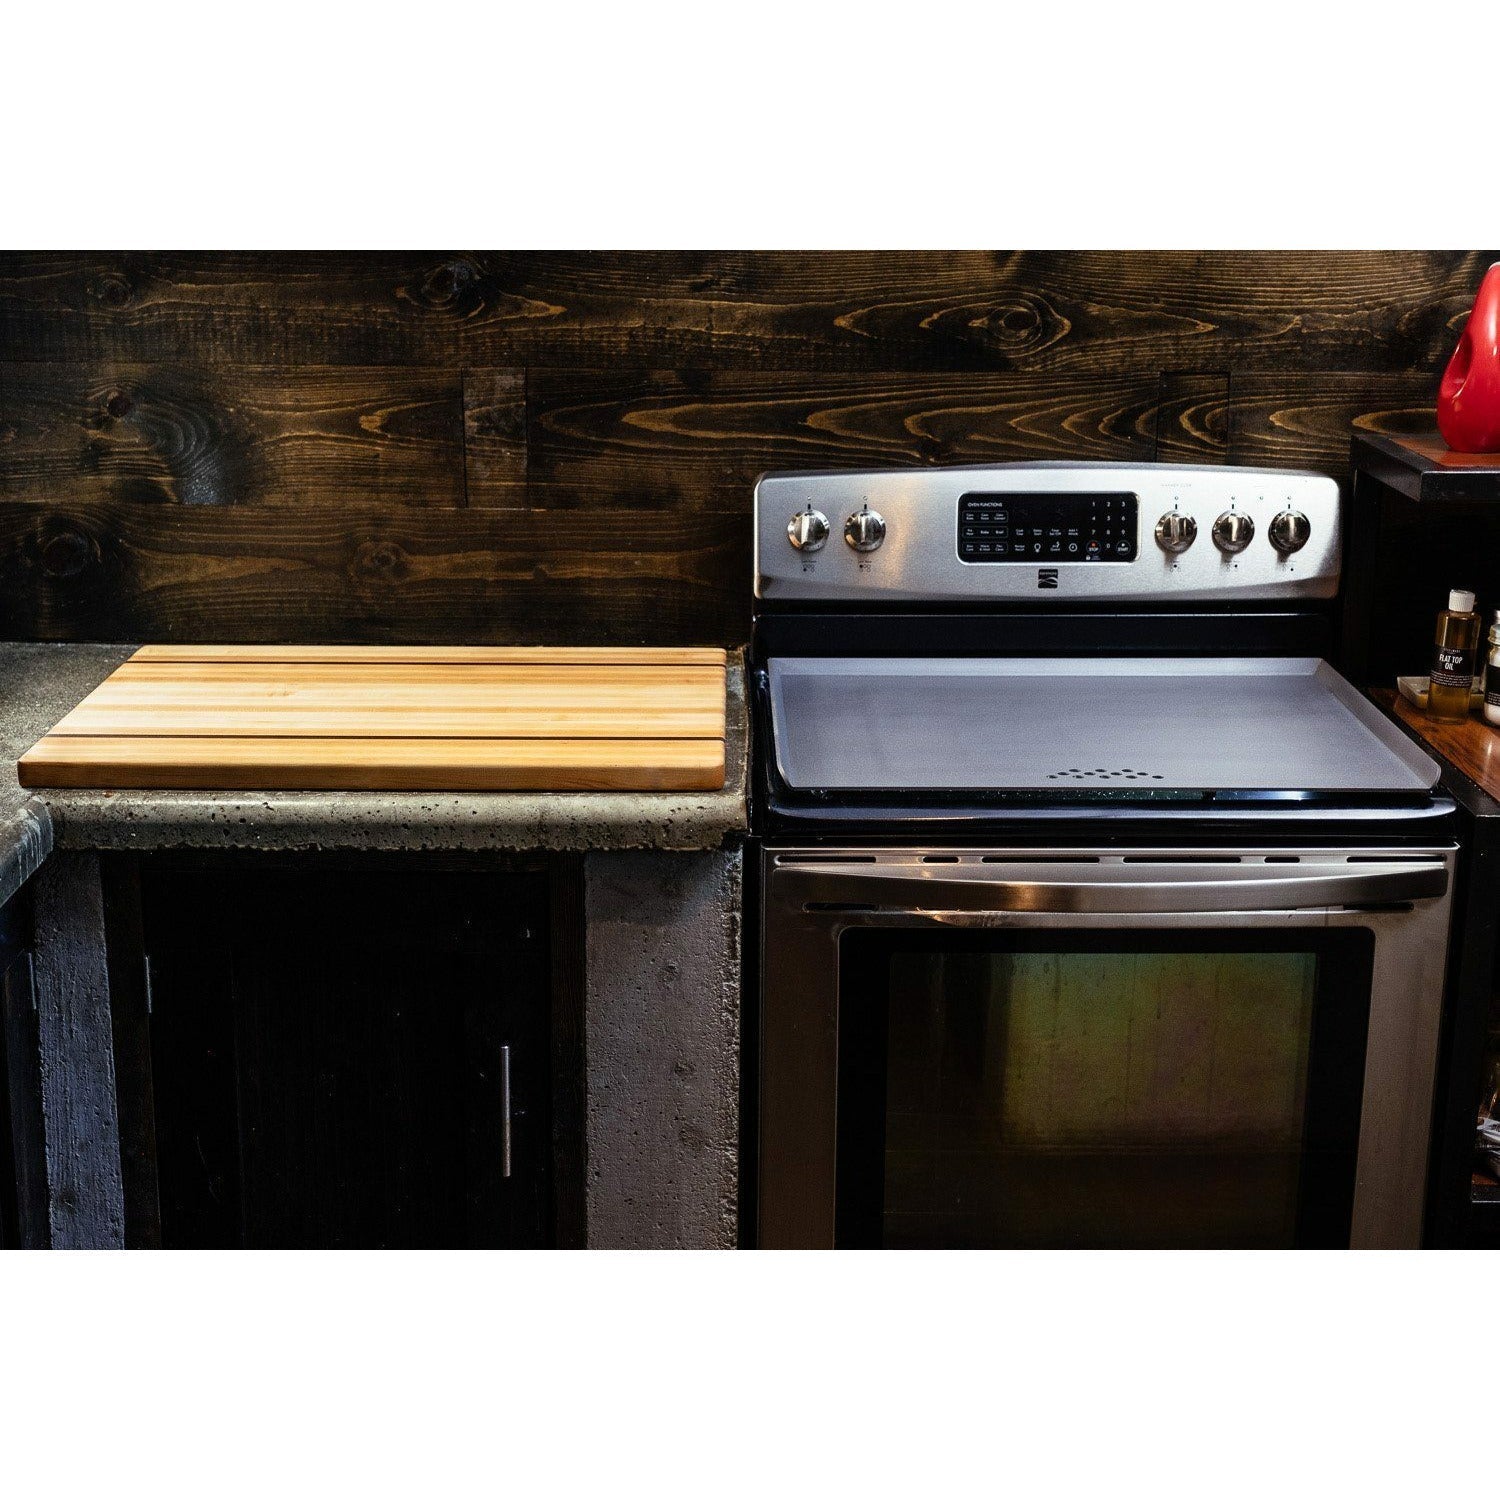 Flat Top for Electric Coils - Steelmade  Flat top grill, Stoves range, Flat  top griddle